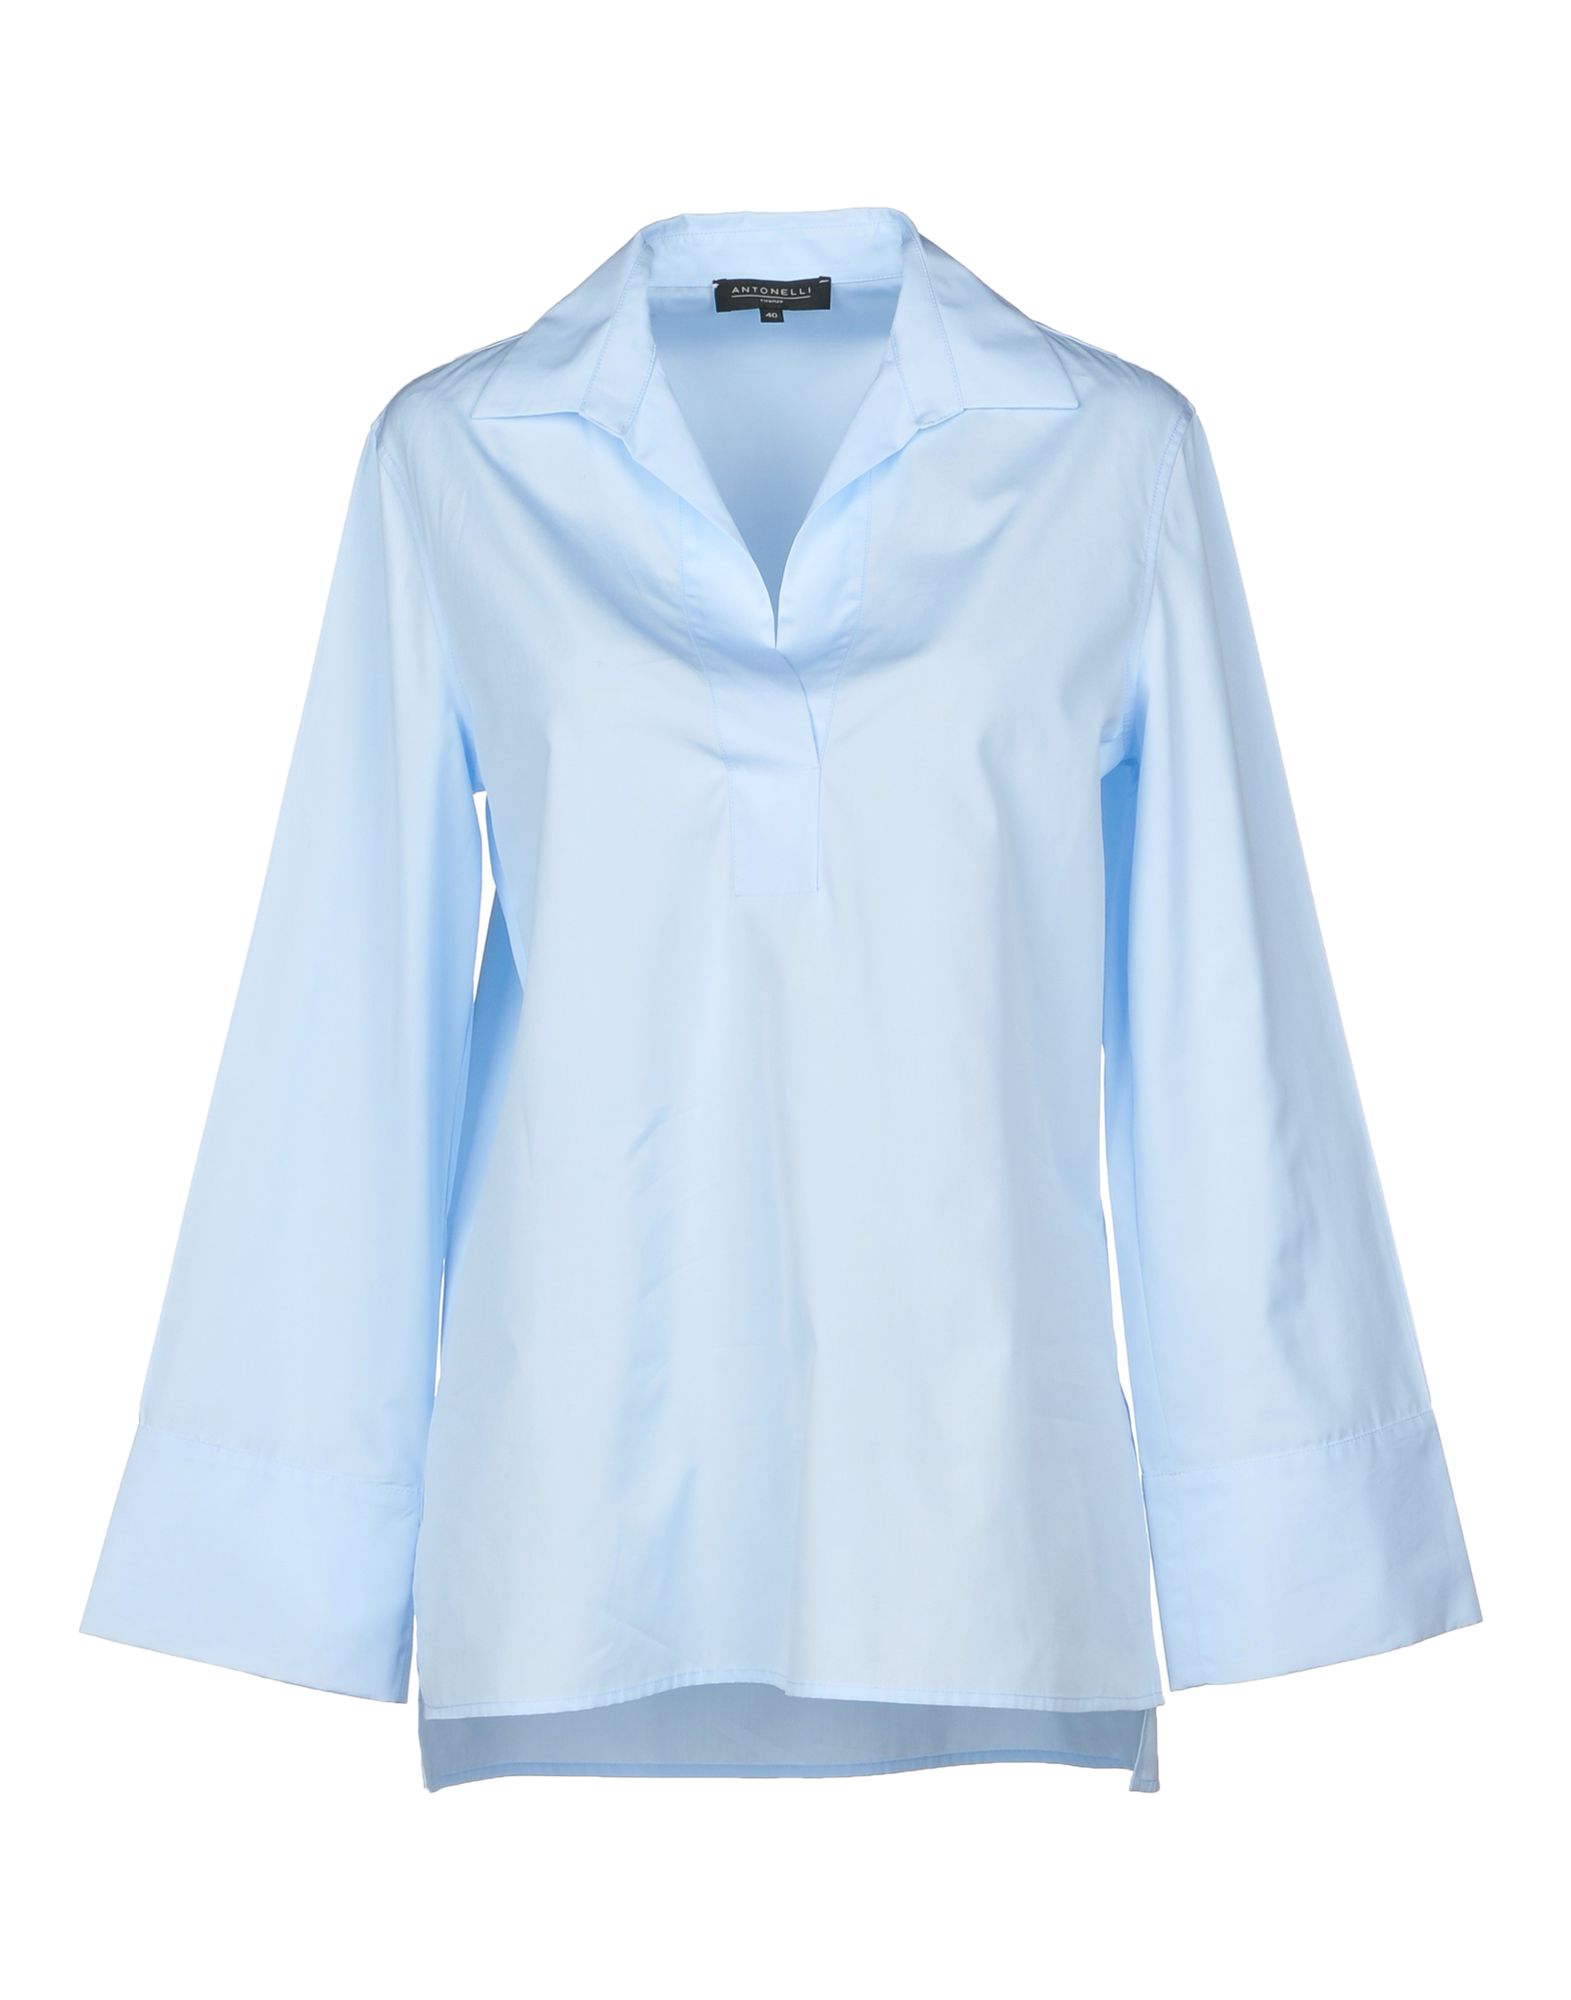 ANTONELLI Solid color shirts & blouses,38755689AD 3